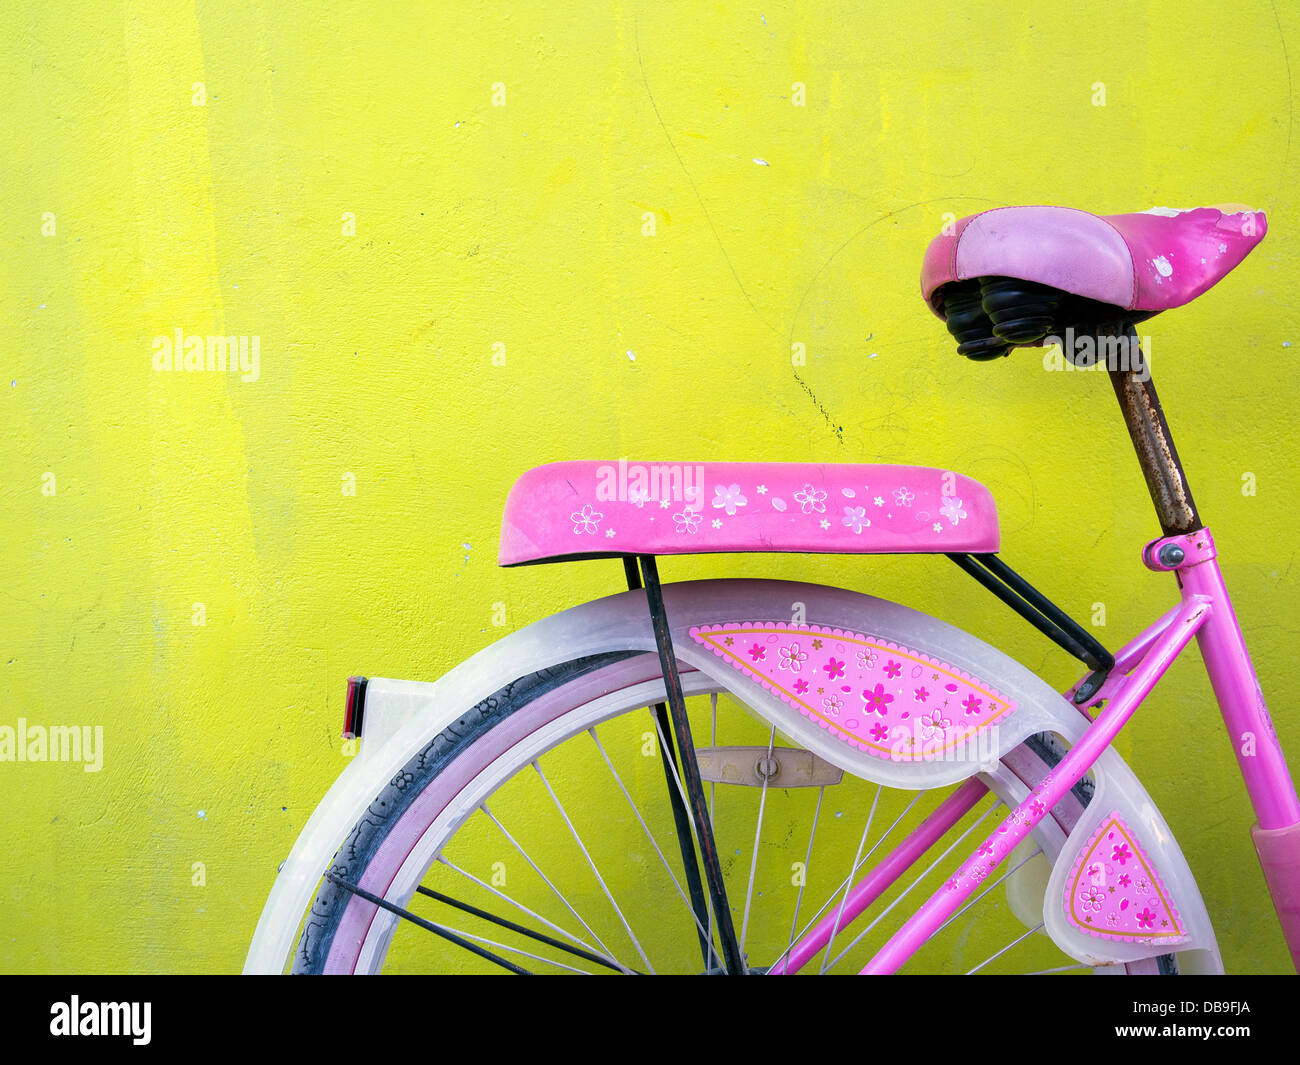 Pink girl's bike with mudguards against a yellow wall Stock Photo